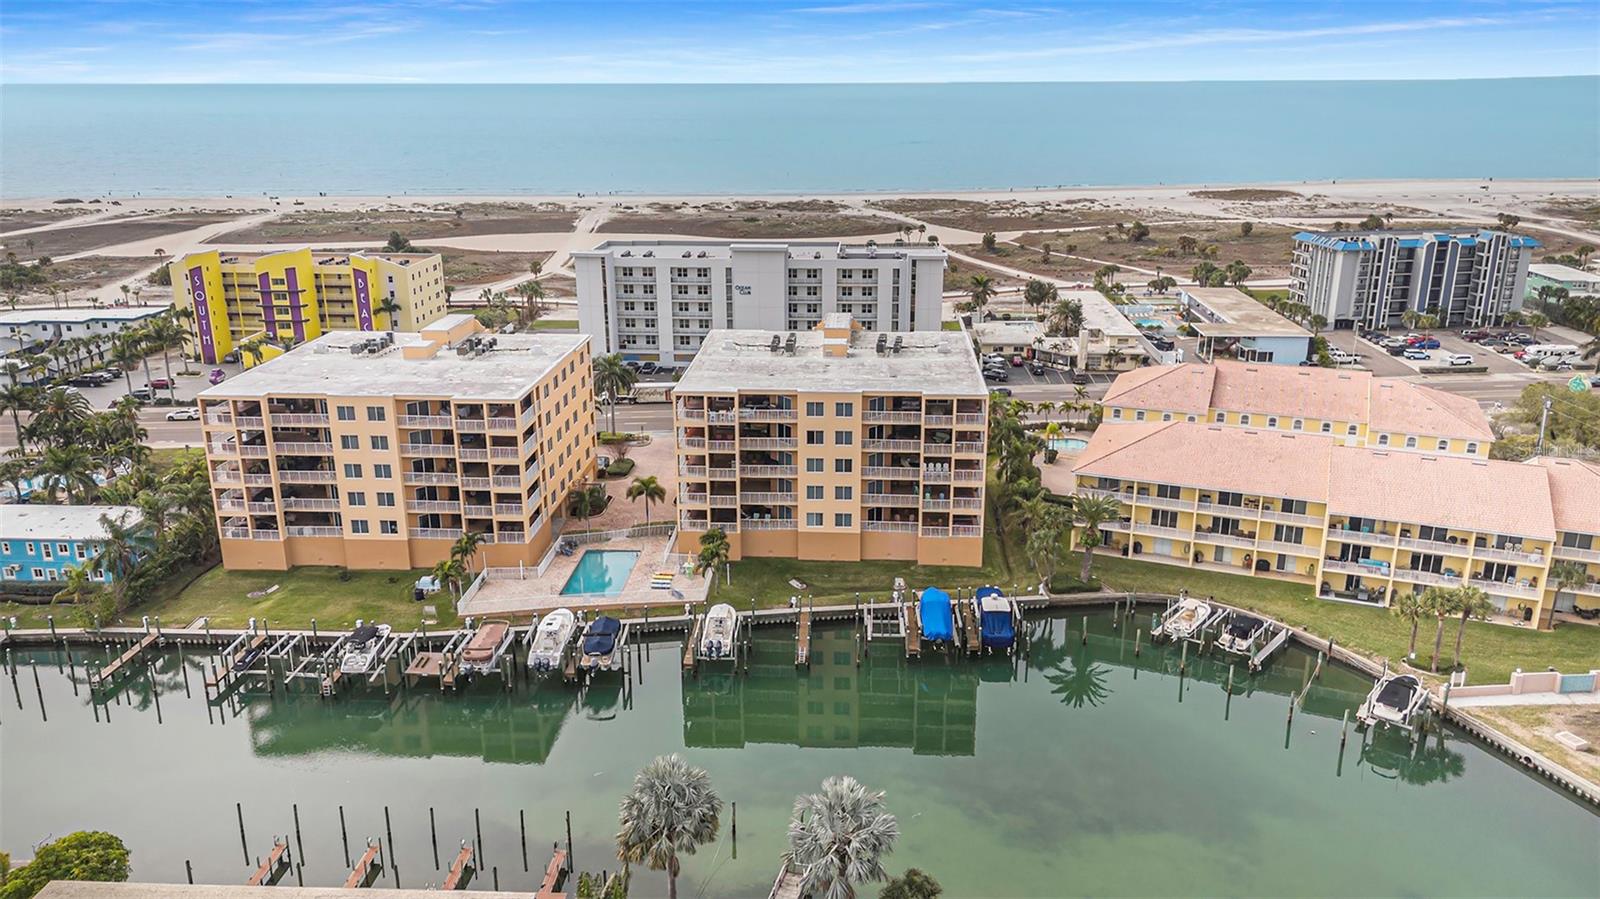 Walk across the street and spend the day on the beach, dock your boat in your deeded slip, and enjoy over 3700 sf located between the Gulf of Mexico and the intracoastal waterway!  This. Is. Florida.